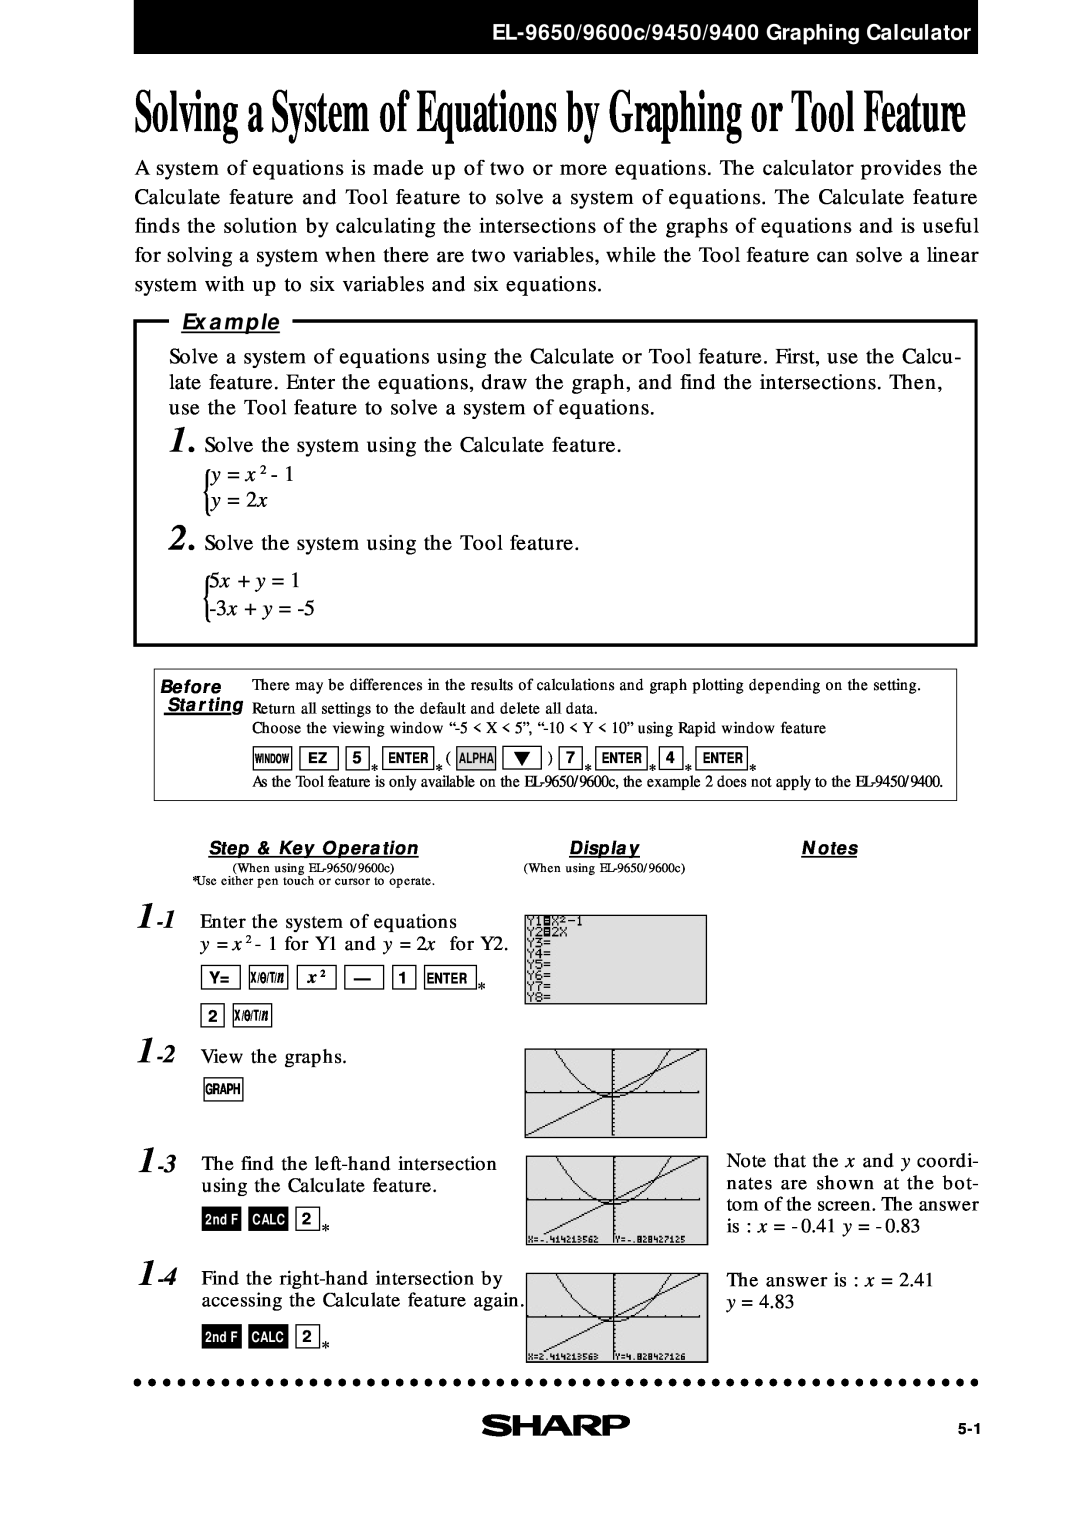 Sharp Solving a System of Equations by Graphing or Tool Feature, EL-9650/9600c/9450/9400 Graphing Calculator, Example 